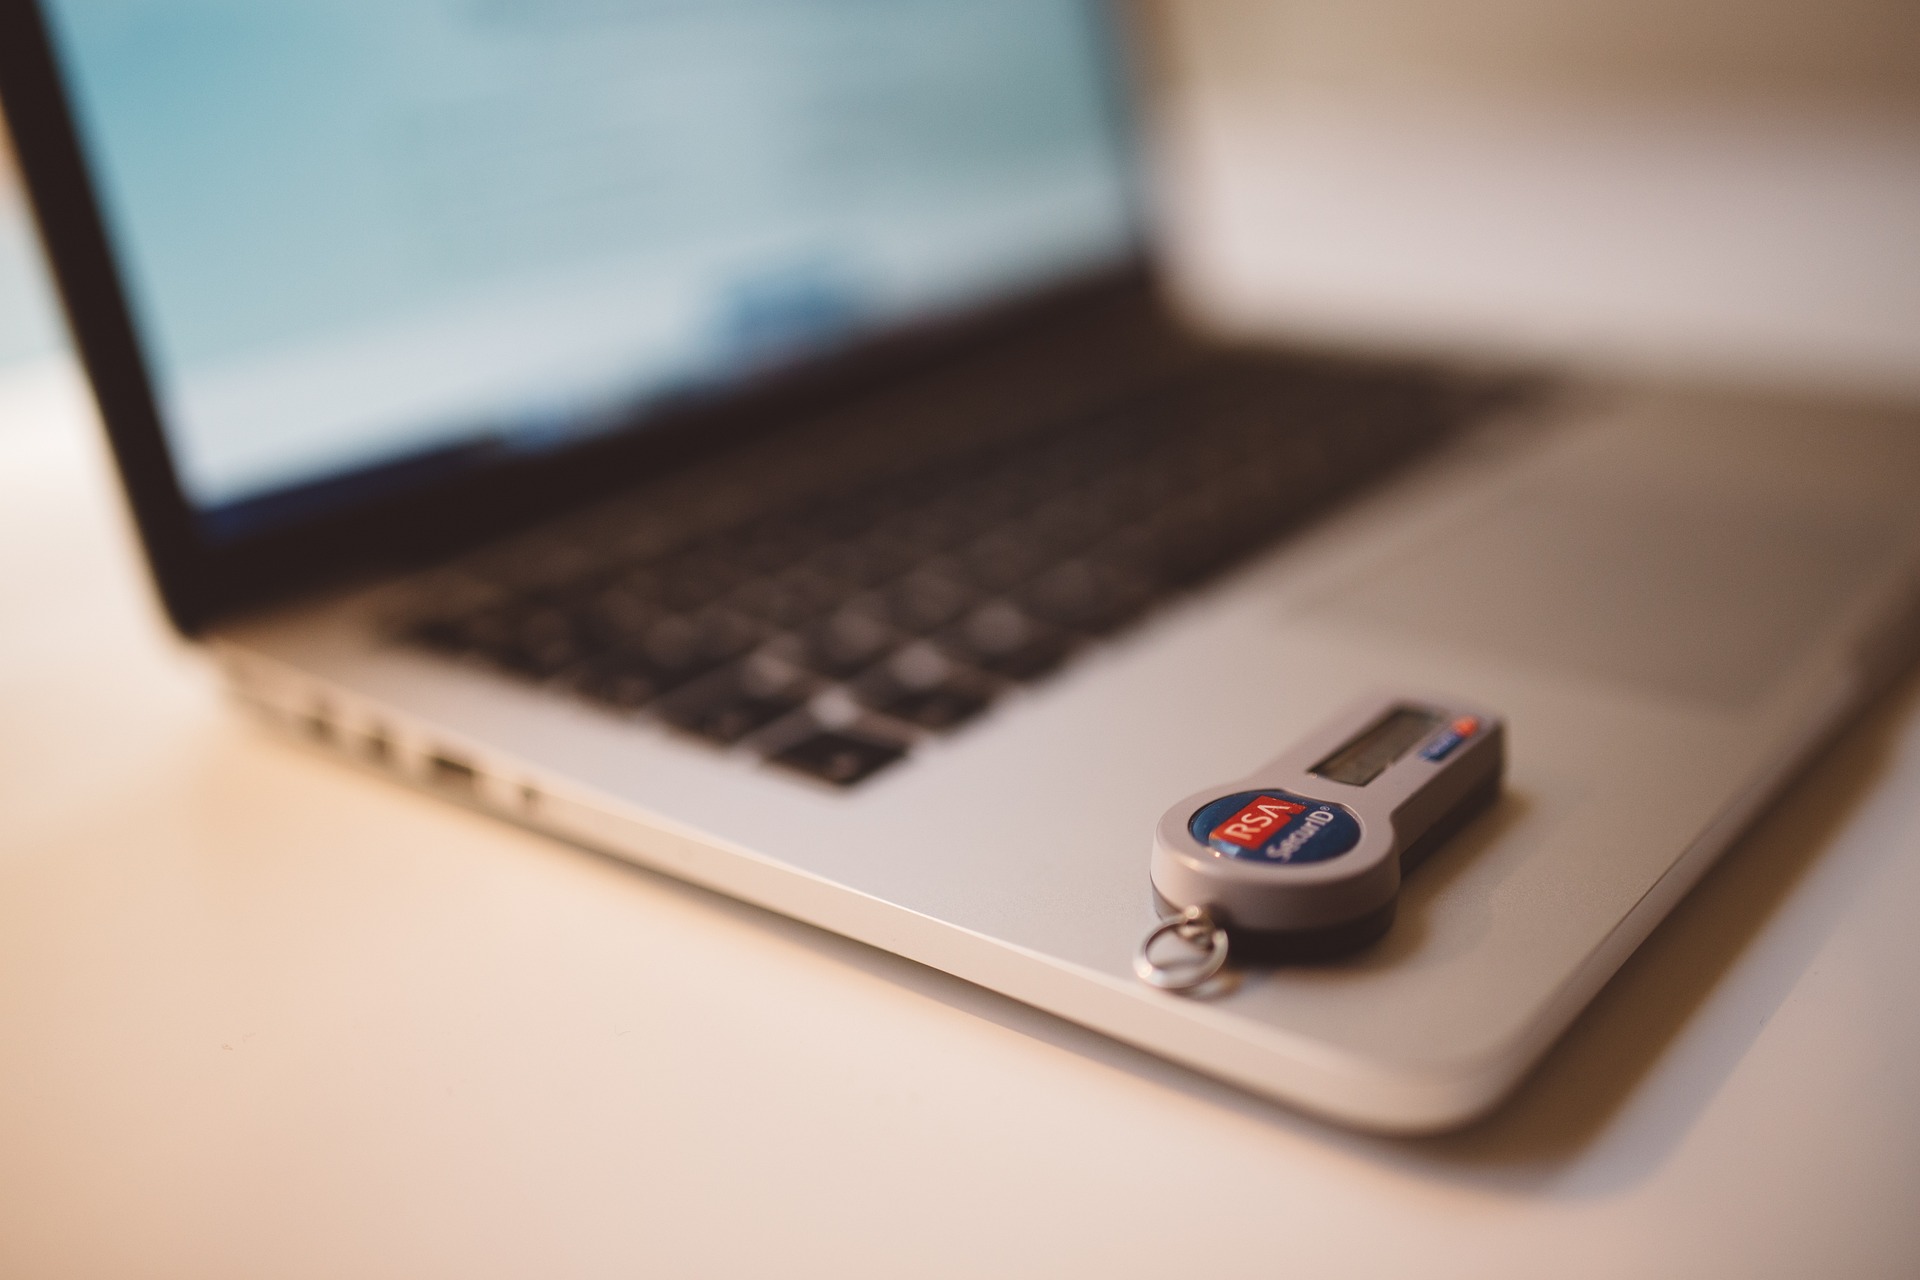 A laptop, with a pen drive / USB stick resting on top; our Conveyancing Solicitors in Lytham discuss ID requirements when buying or selling property to reduce fraud.